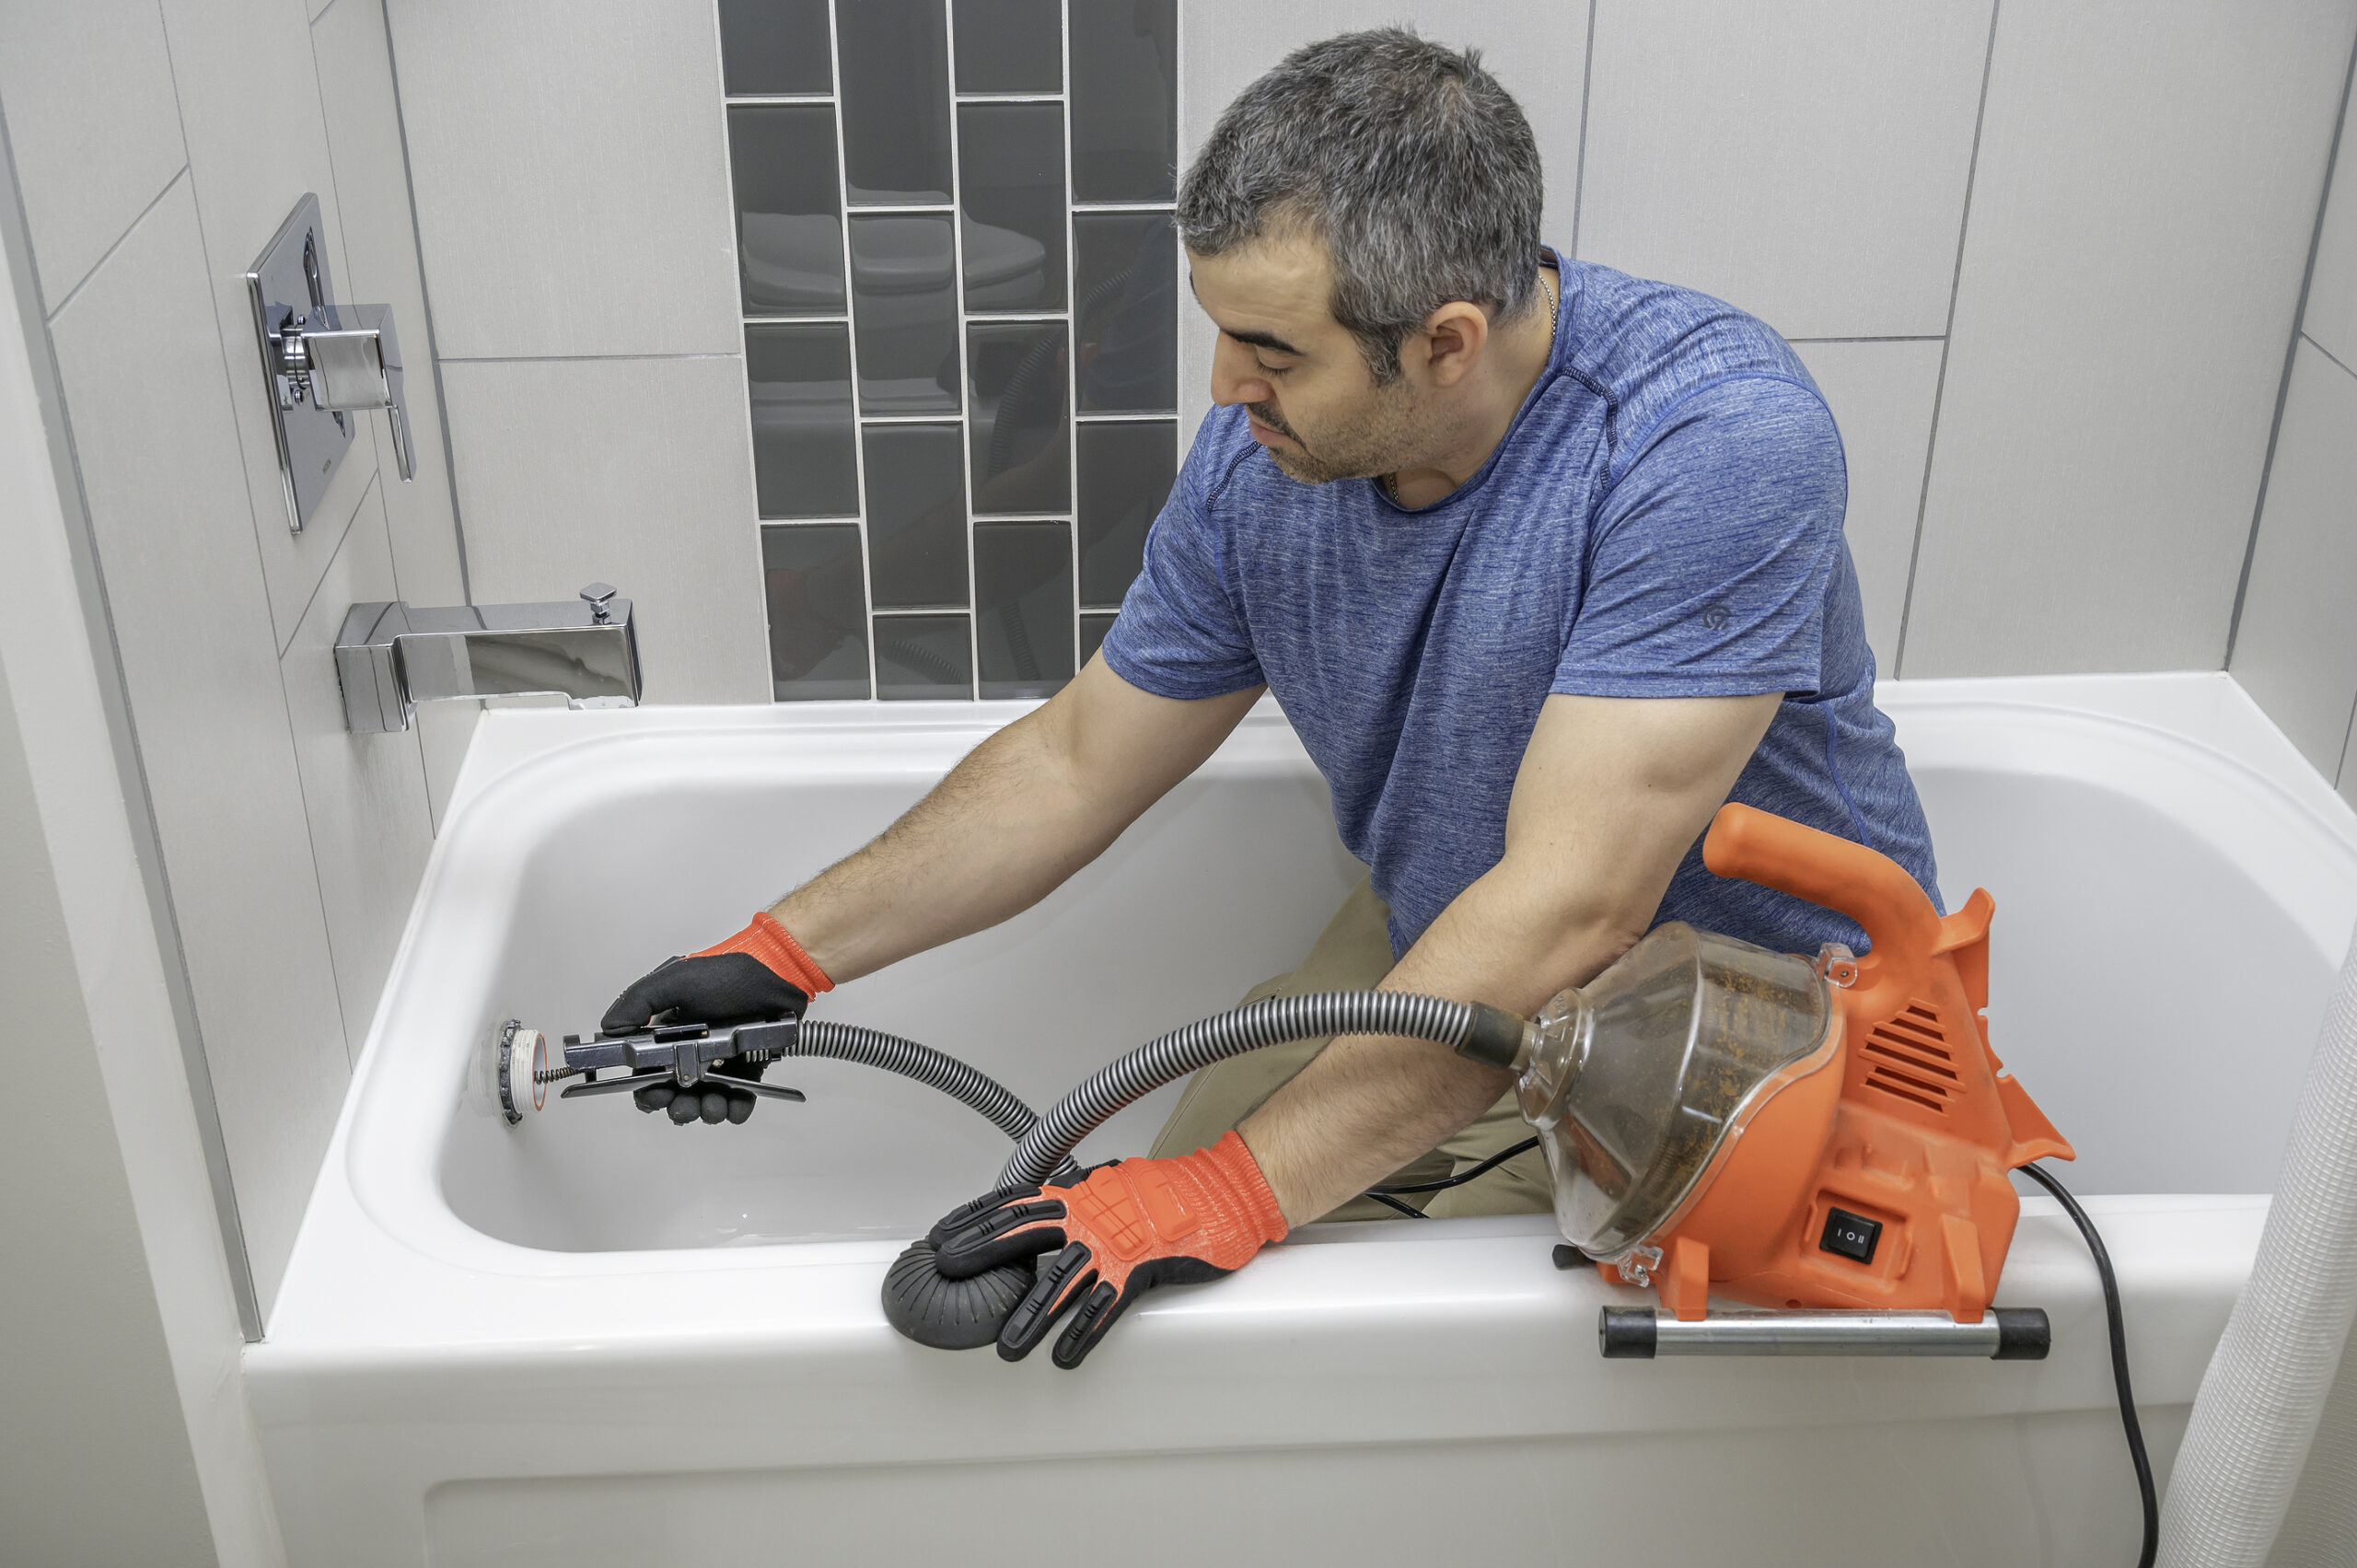 https://www.blockbusters.co.uk/wp-content/uploads/2022/03/Man-Using-A-Mini-Plumbers-Snake-to-unclog-bath-scaled.jpg